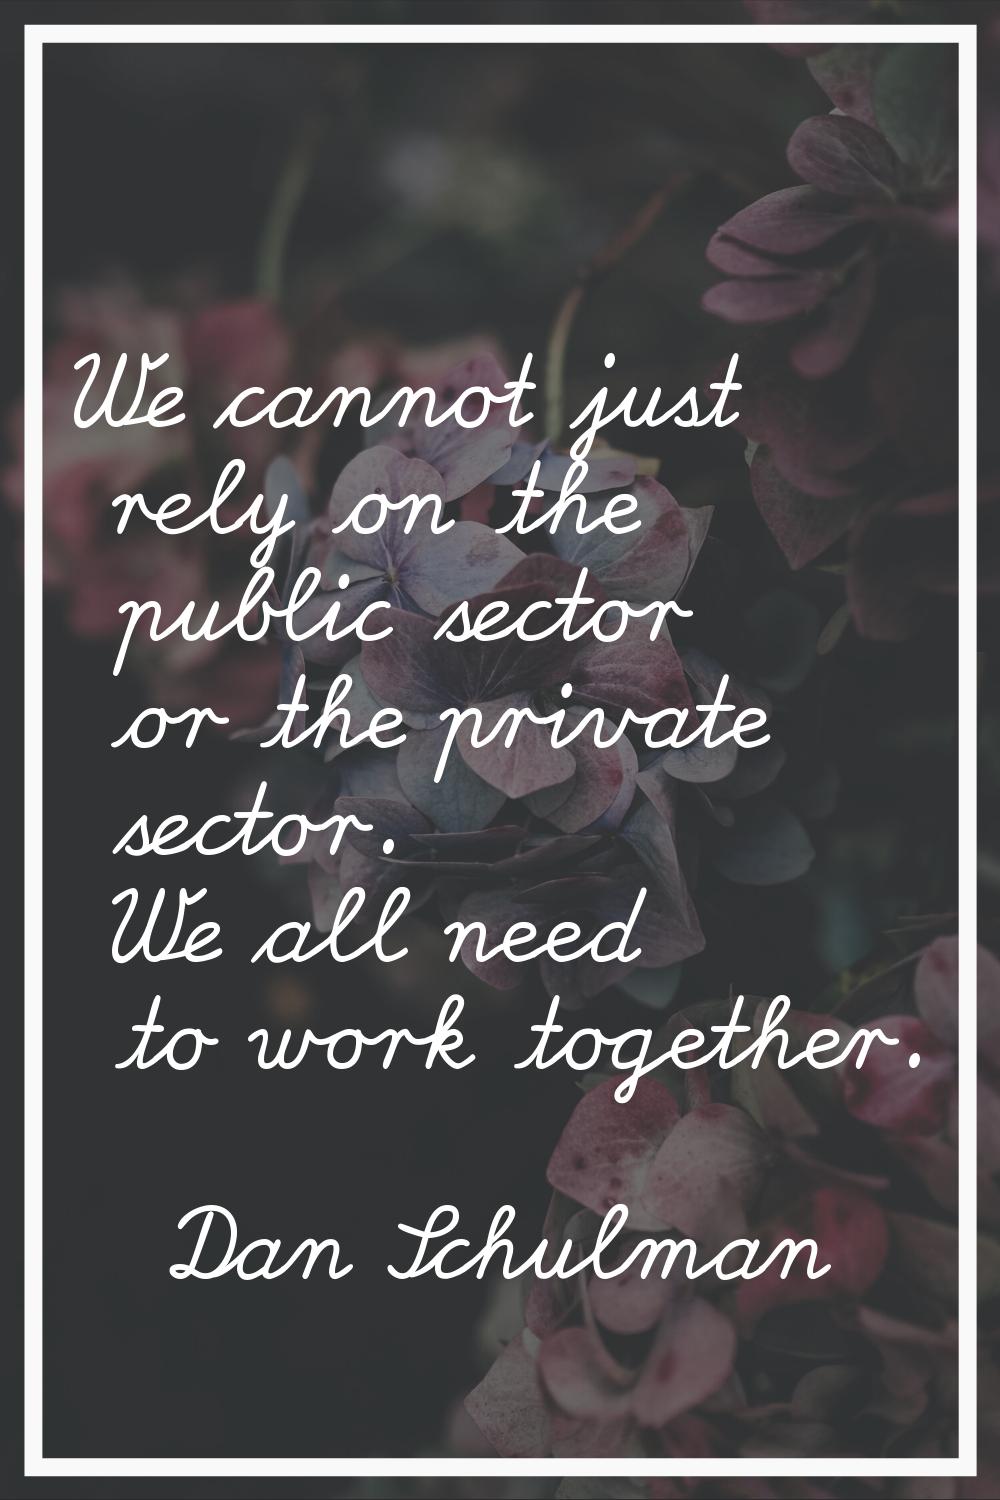 We cannot just rely on the public sector or the private sector. We all need to work together.